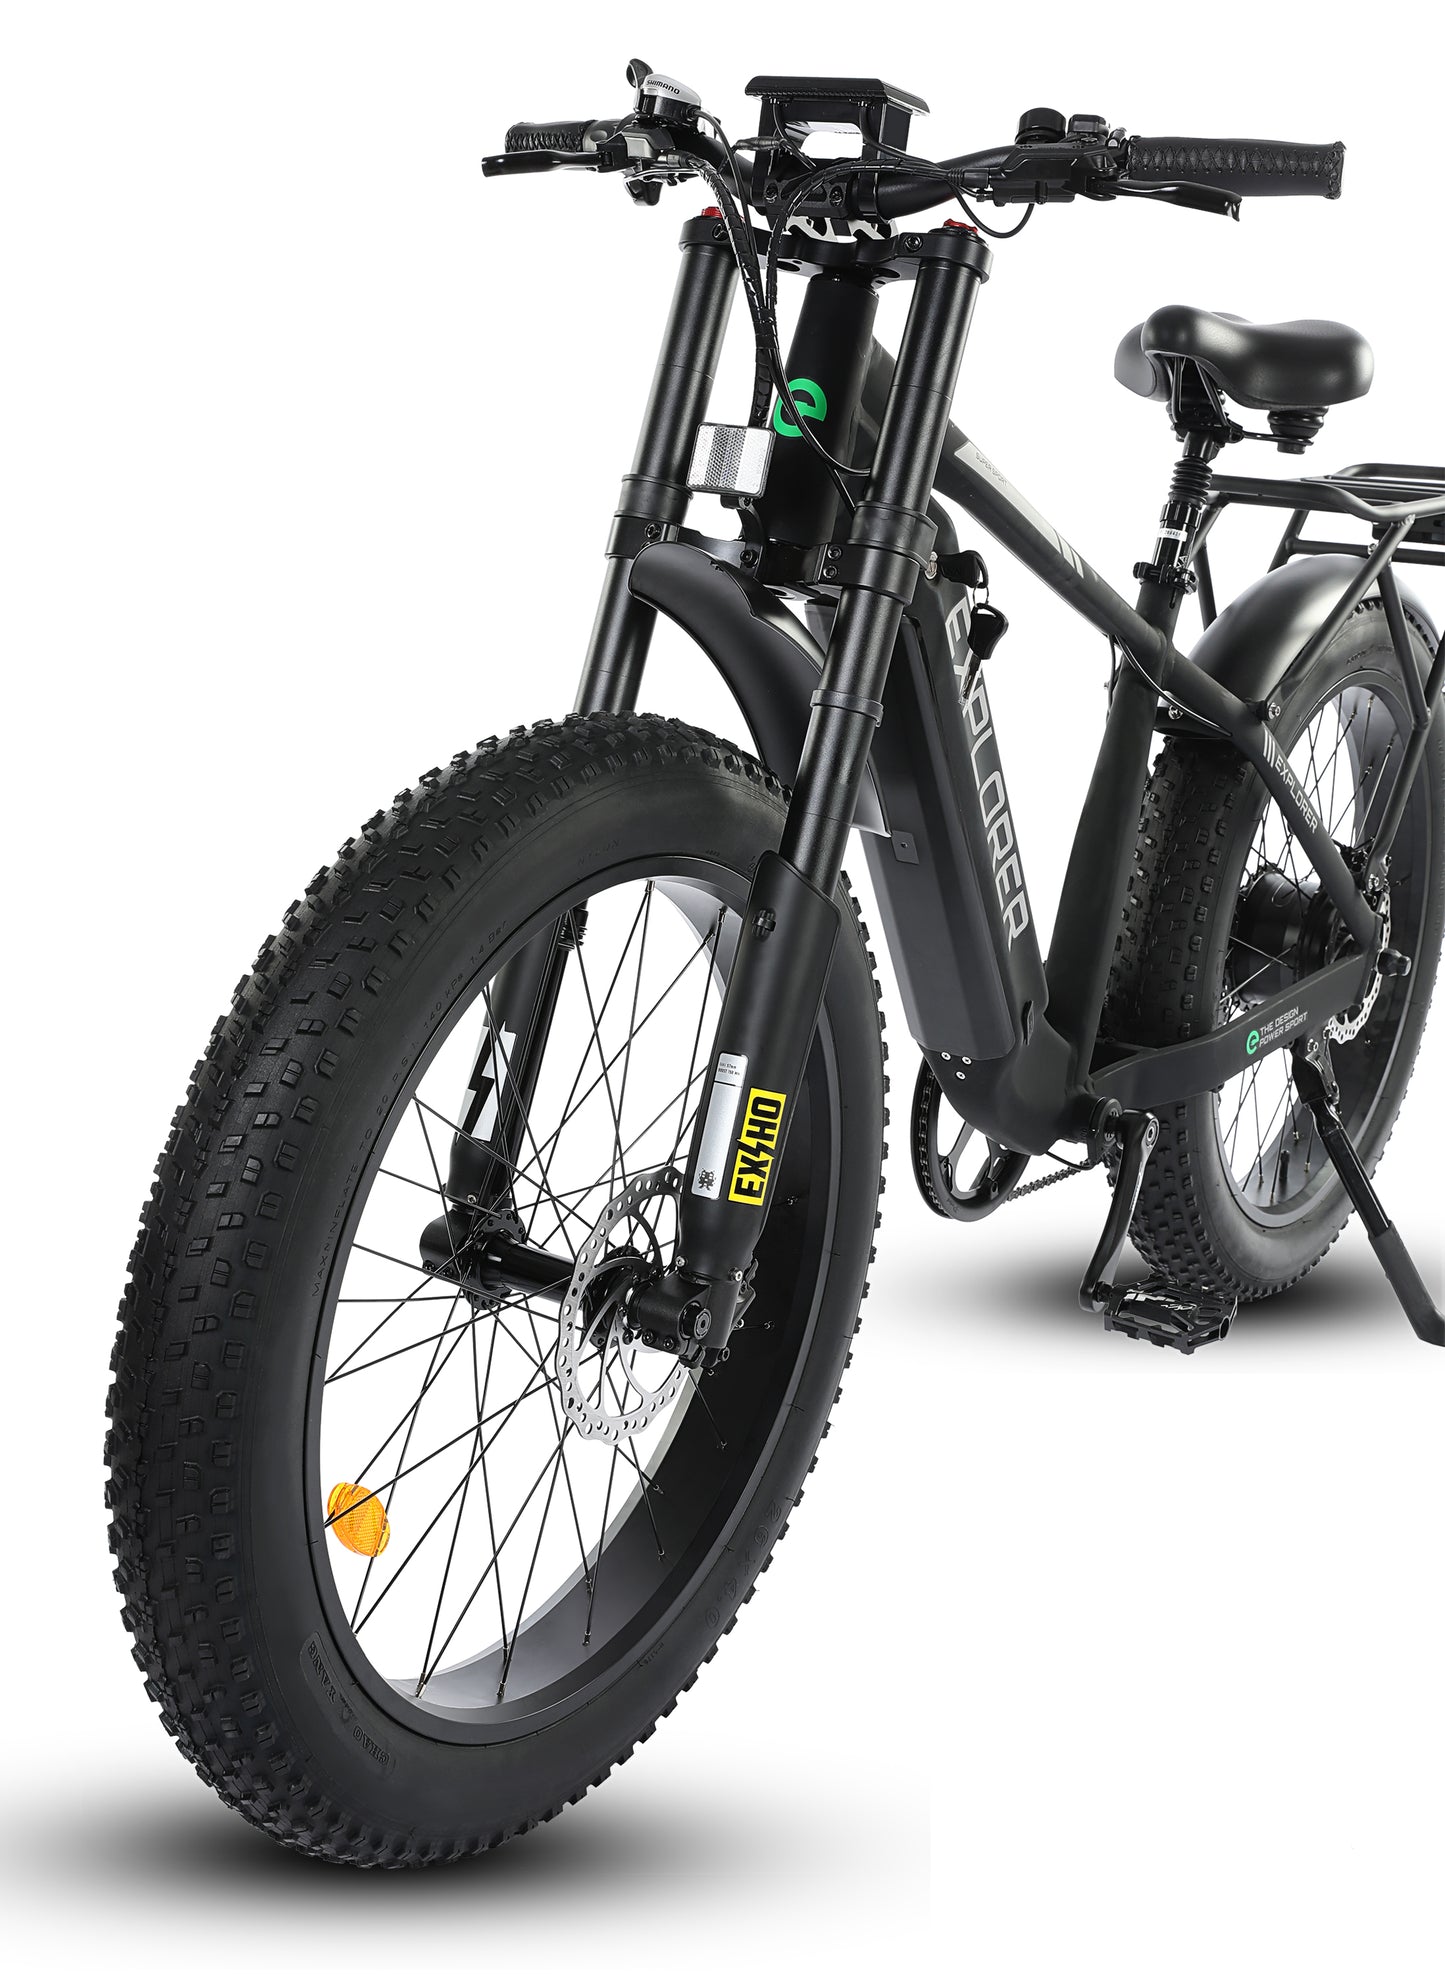 Ecotric Explorer 26 inches 48V Fat Tire Electric Bike with Rear Rack